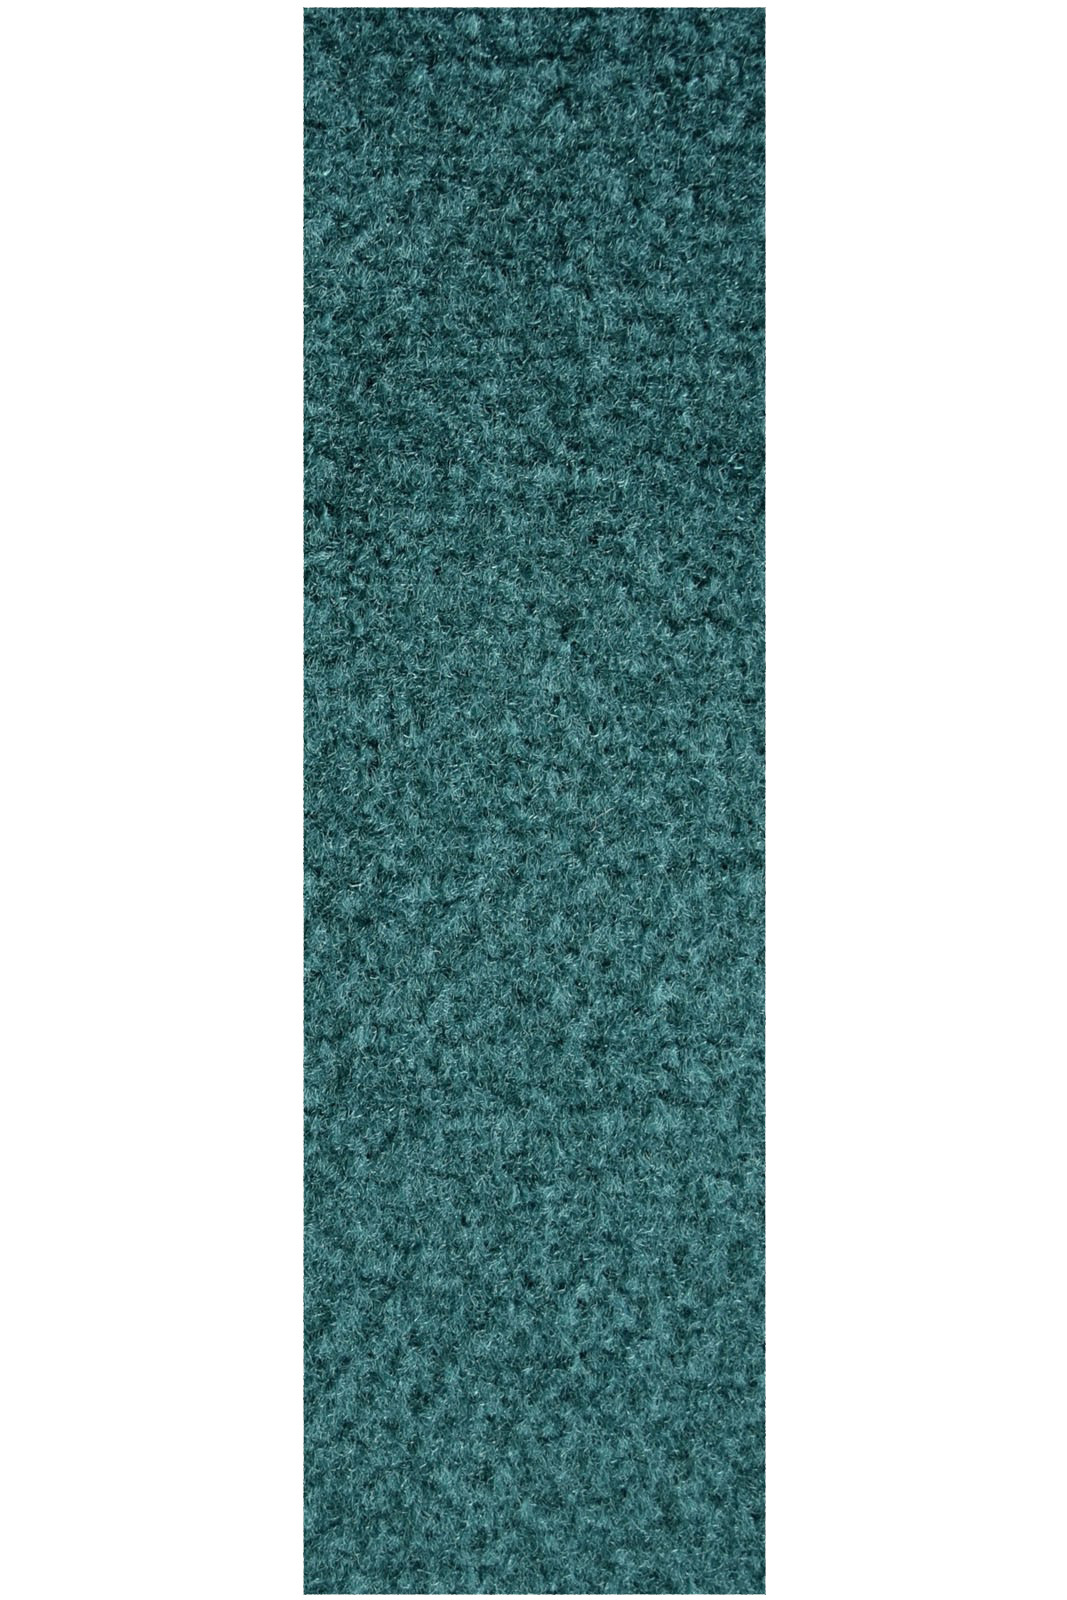 Commercial Indoor/Outdoor Teal Custom Size Runner 2' x 18' - Area Rug with Rubber Marine Backing for Patio, Porch, Deck, Boat, Basement or Garage with Premium Bound Polyester Edges - image 1 of 1